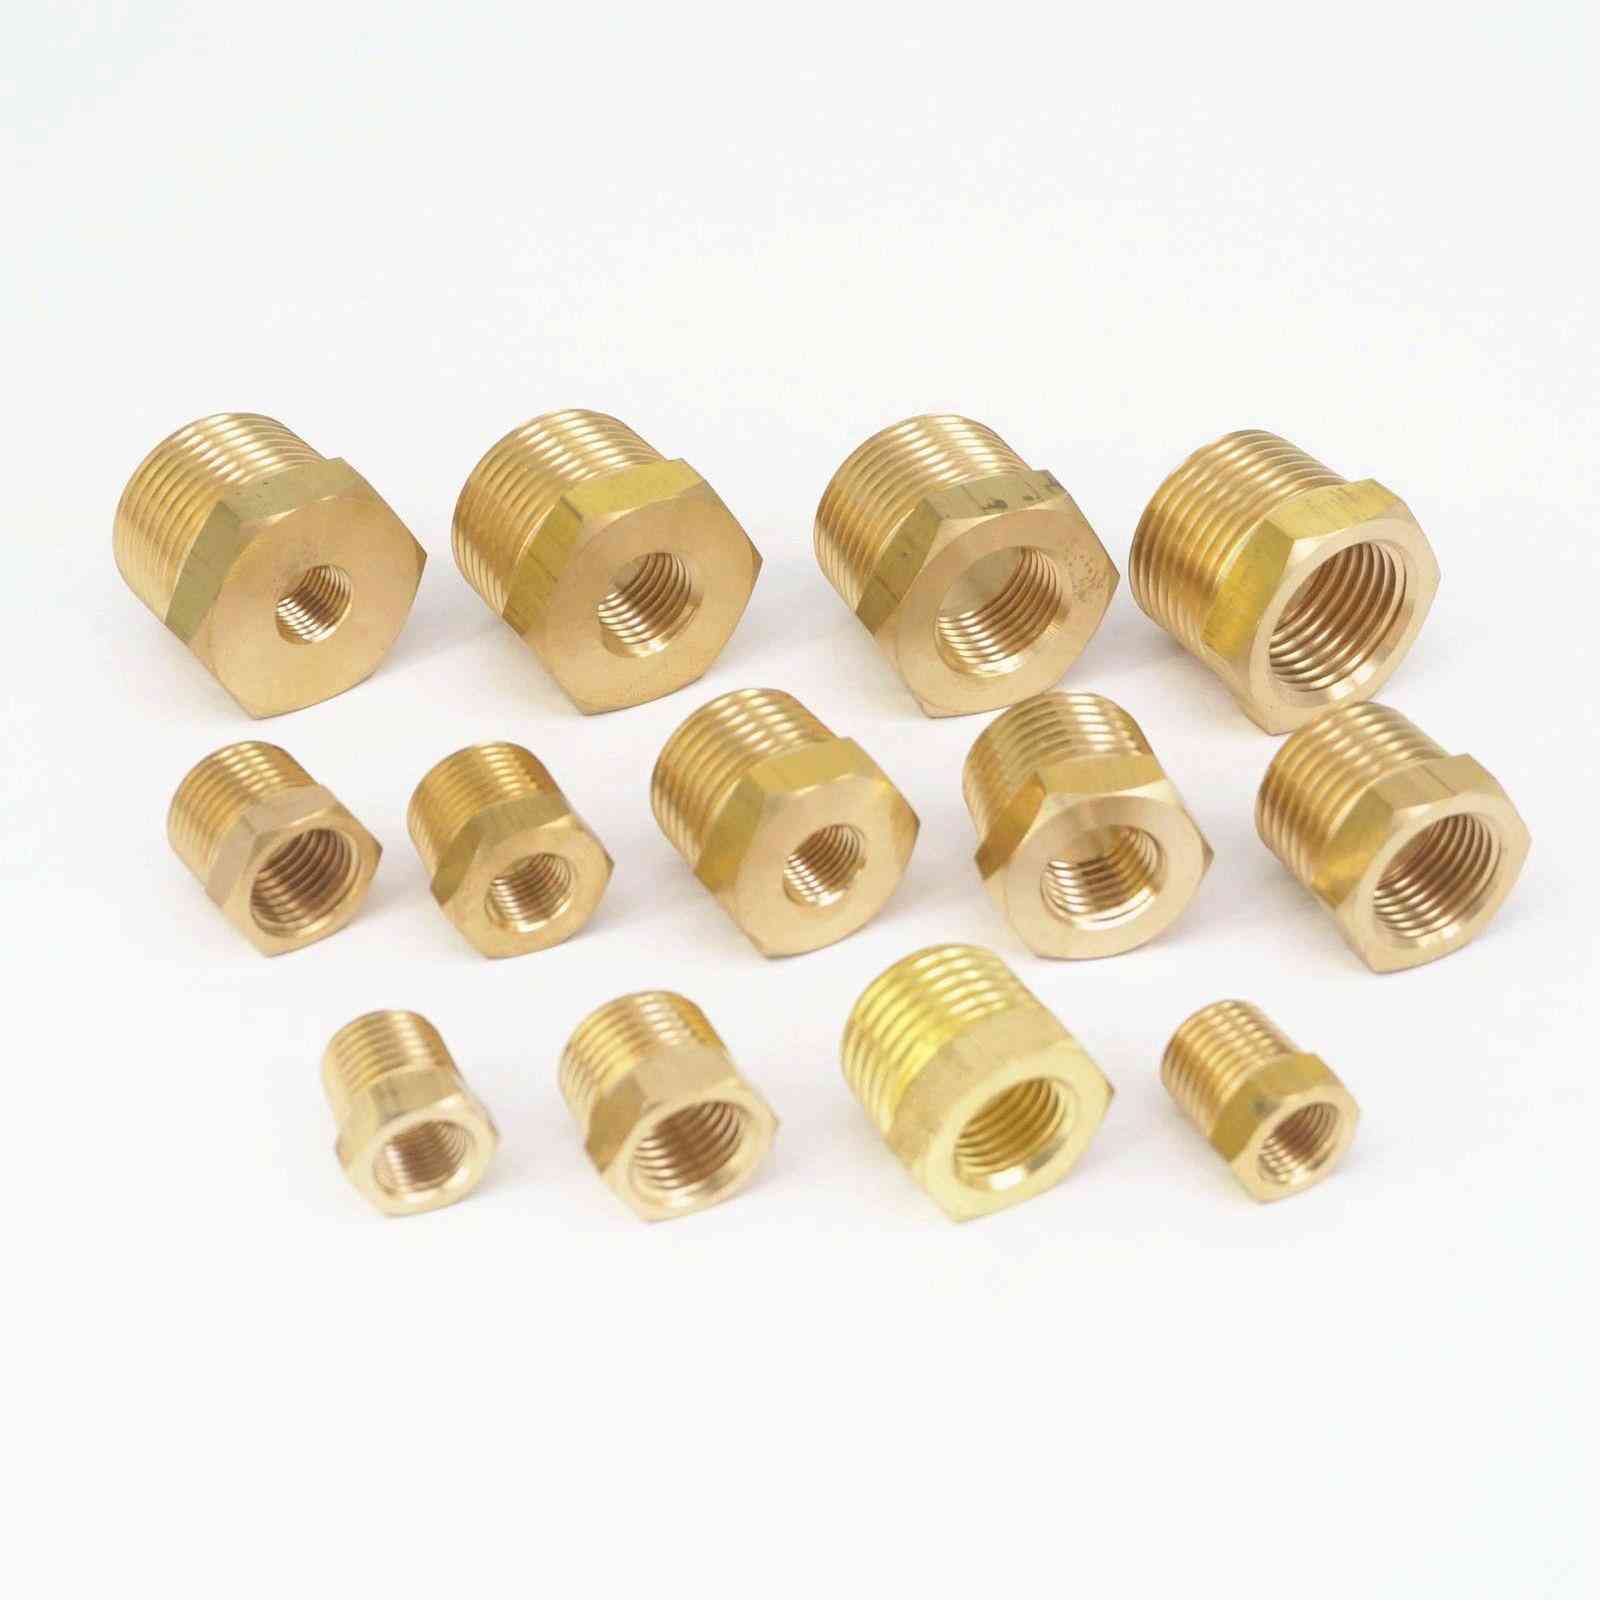 Npt Bspt Male X Female Brass Reducing Bushing Pipe Fittings Connectors Adapter Air Gas Fuel Water